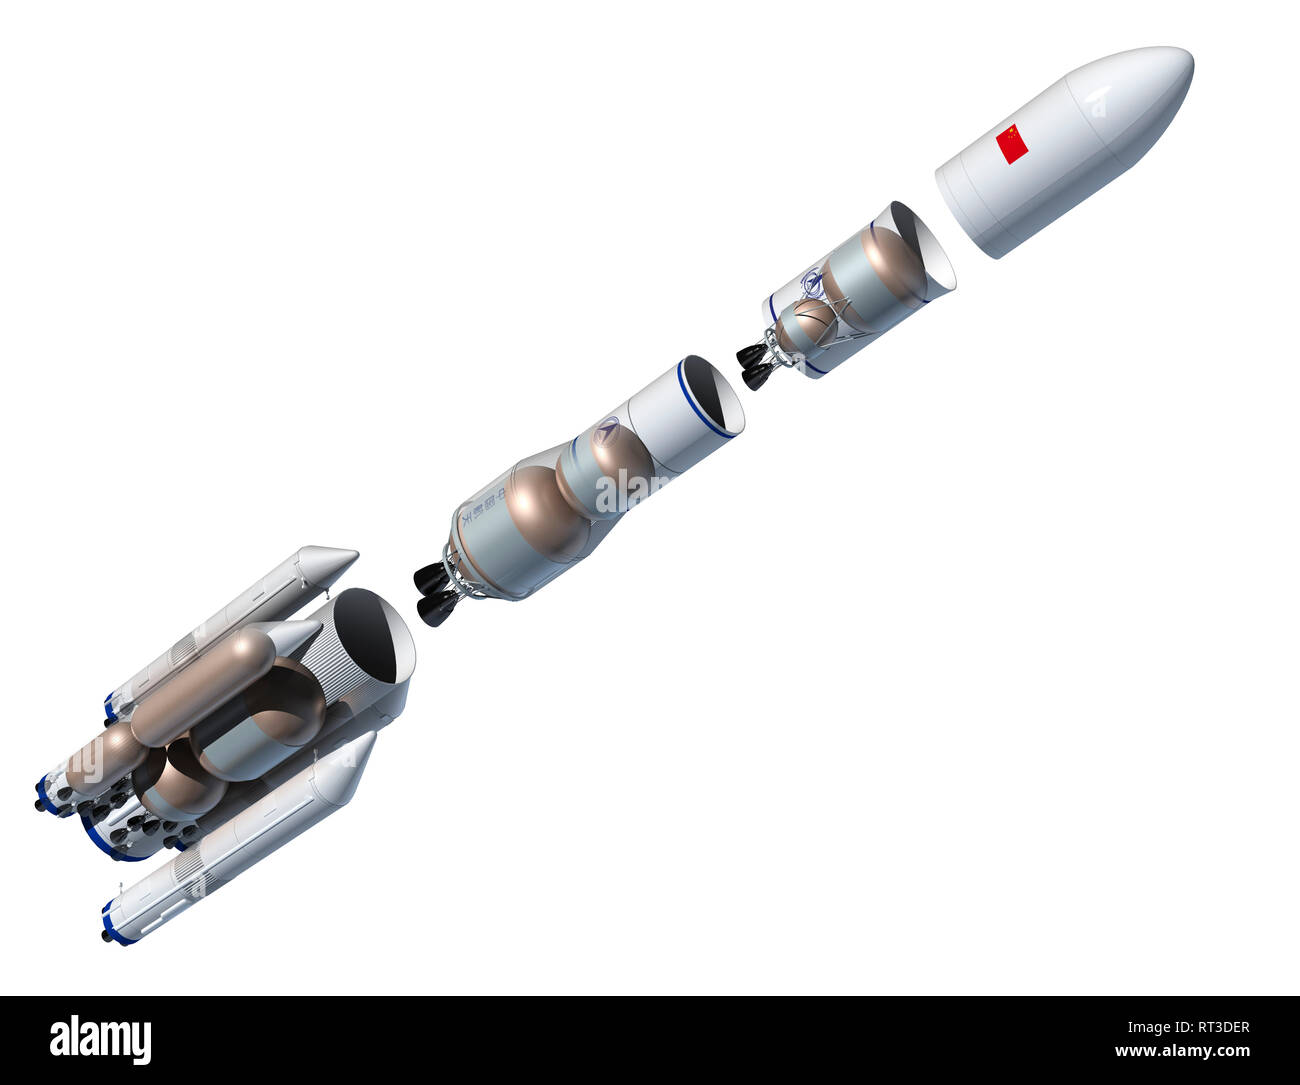 Future Chinese rocket, Long March 9, angled view with fuel tanks - exploded view. Stock Photo